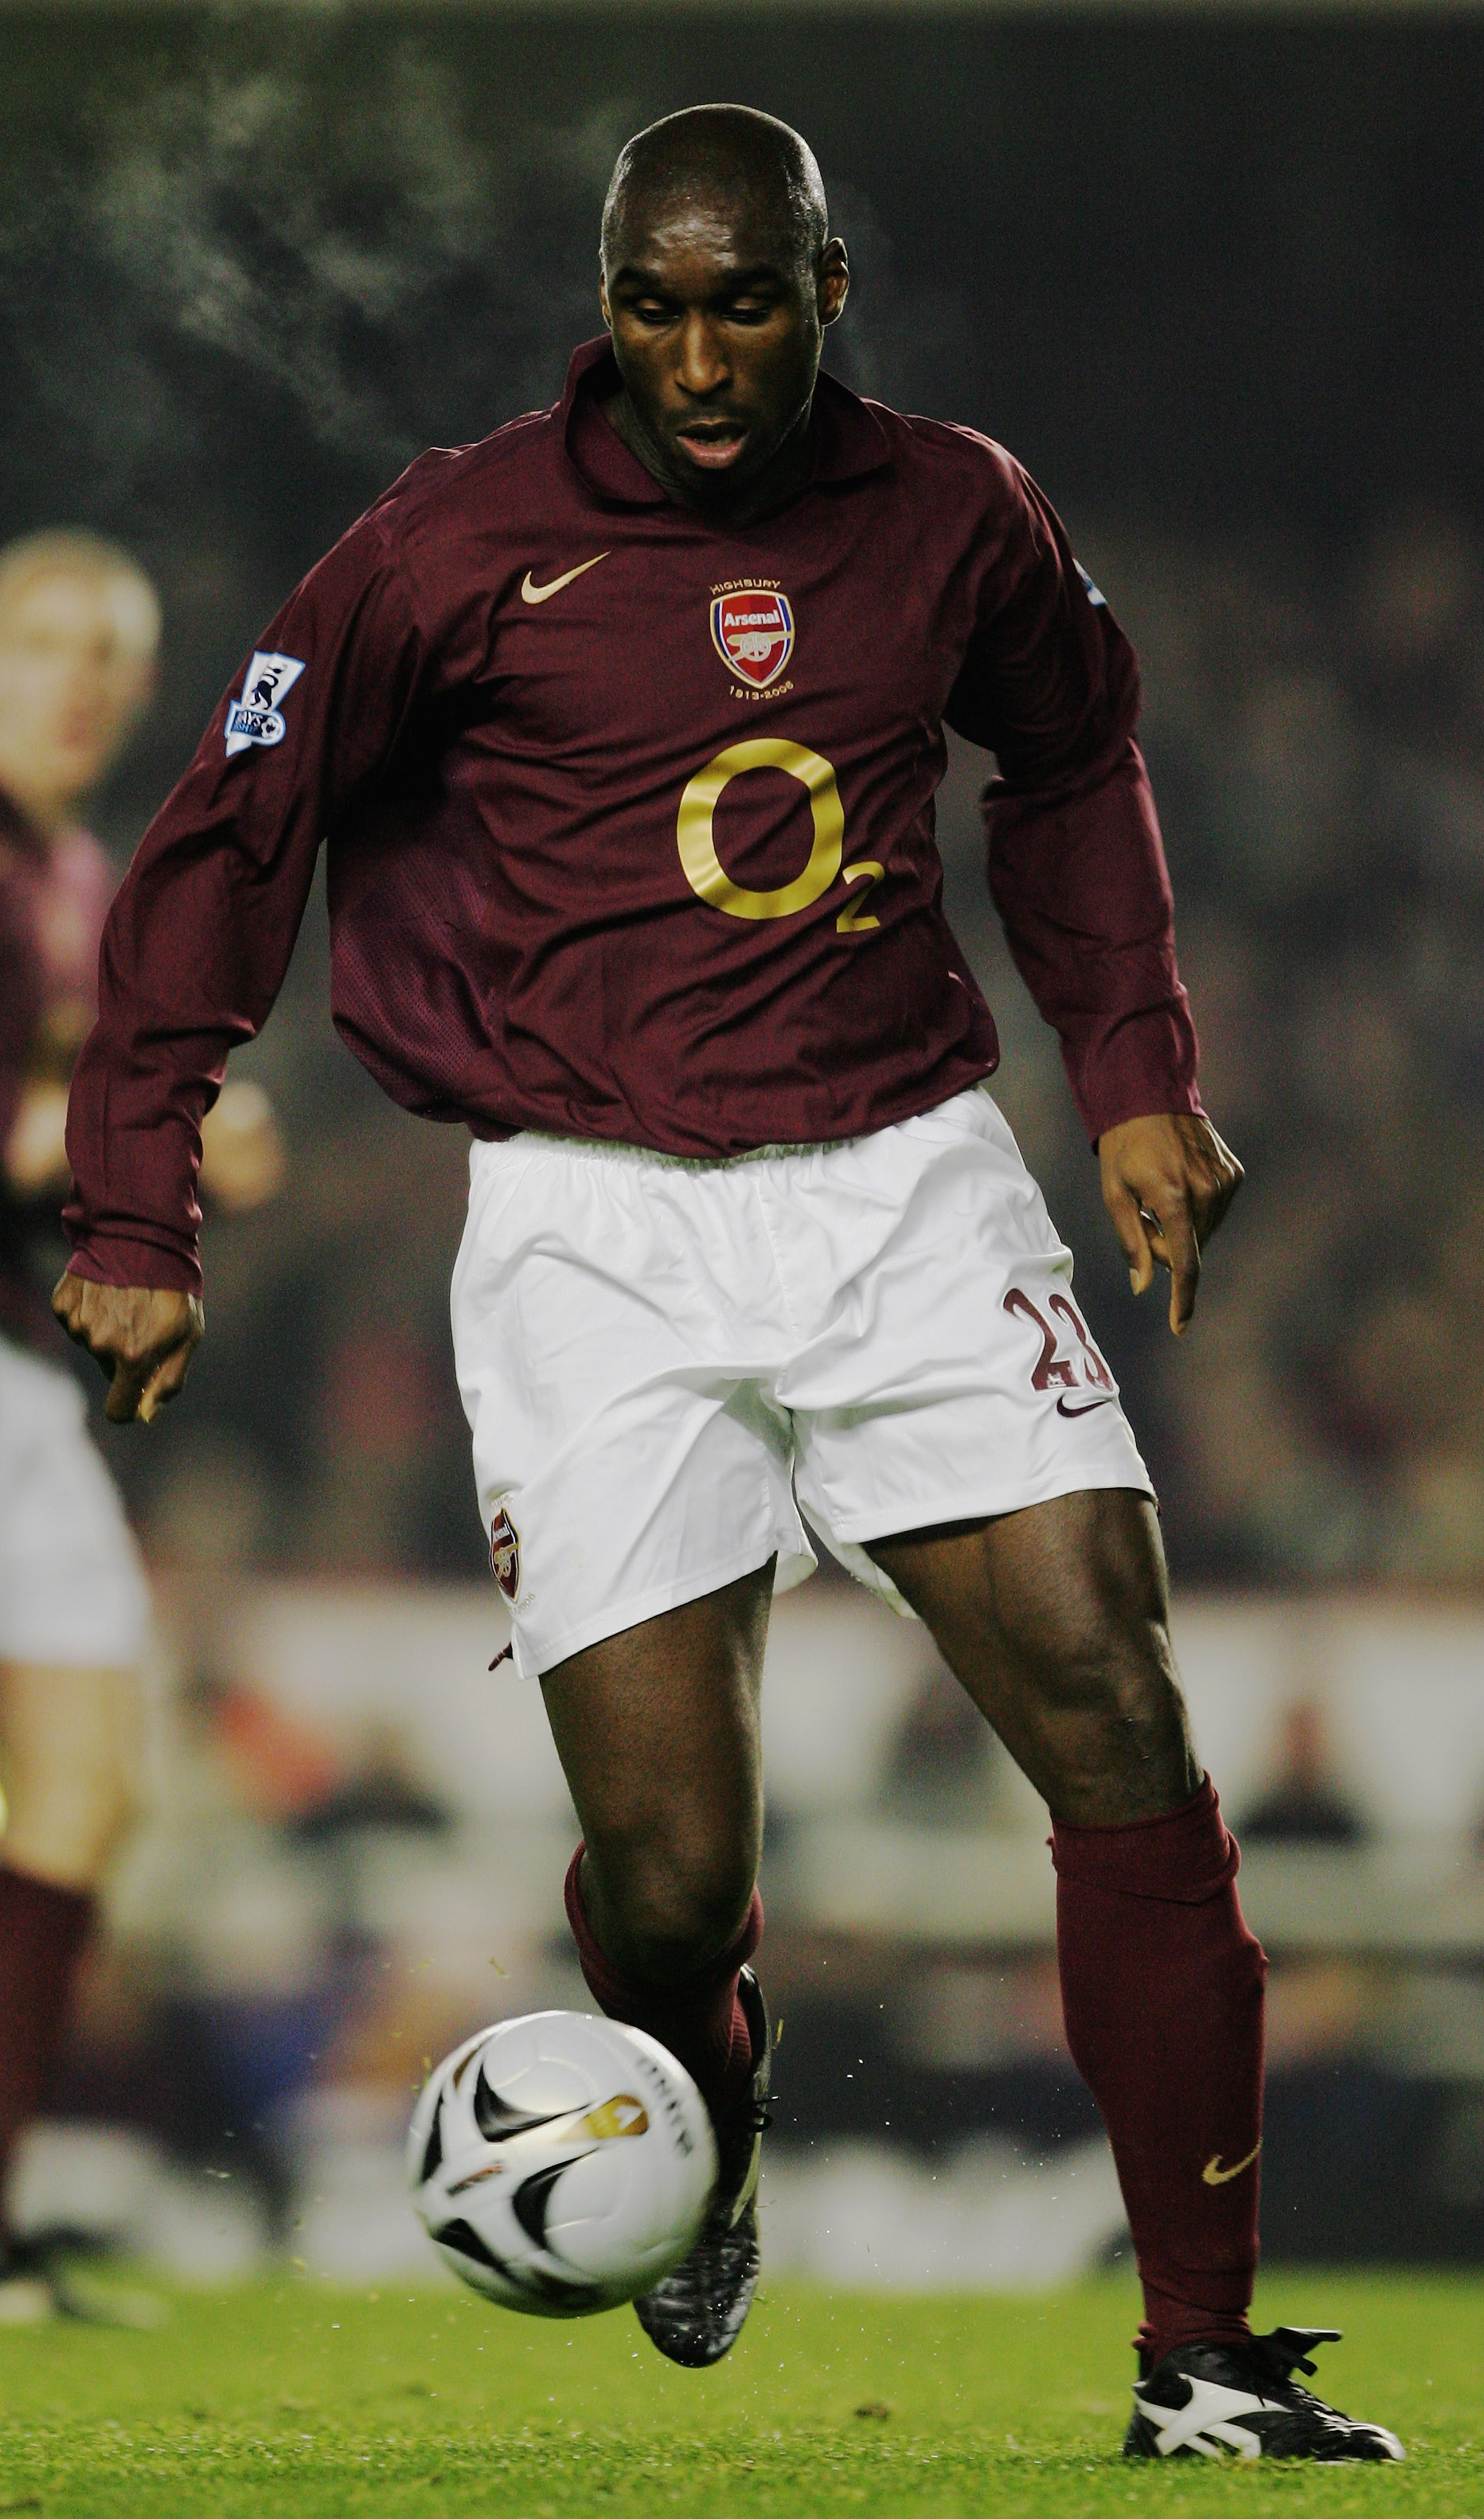 LONDON - JANUARY 24:  Sol Campbell of Arsenal in action during the Carling Cup Semi Final 2nd leg between Arsenal and Wigan Athletic at Highbury Stadium on January 24, 2006 in London, England.  (Photo by Clive Mason/Getty Images)